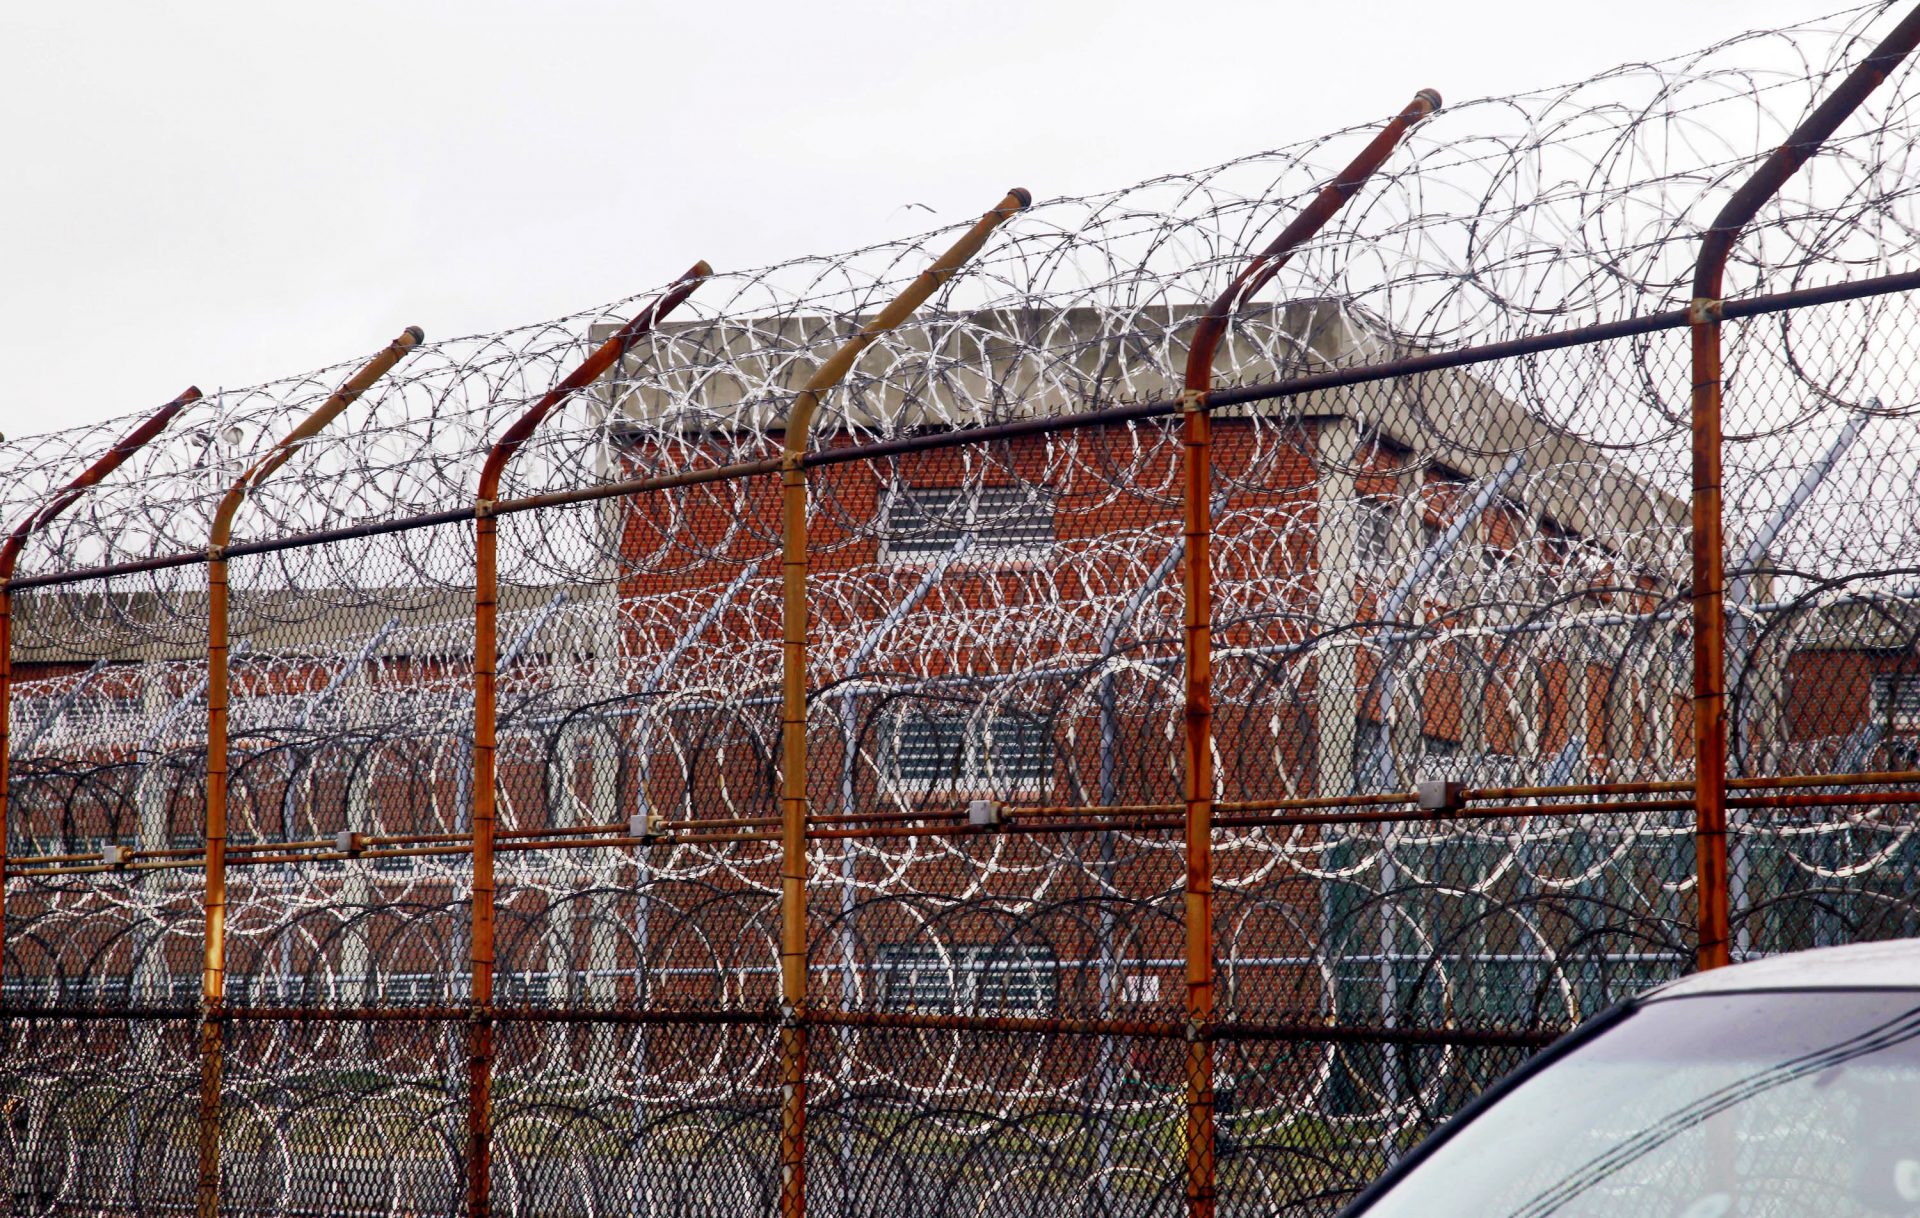 FILE PHOTO: In this March 16, 2011, file photo, a security fence surrounds the inmate housing on New York's Rikers Island correctional facility in New York.